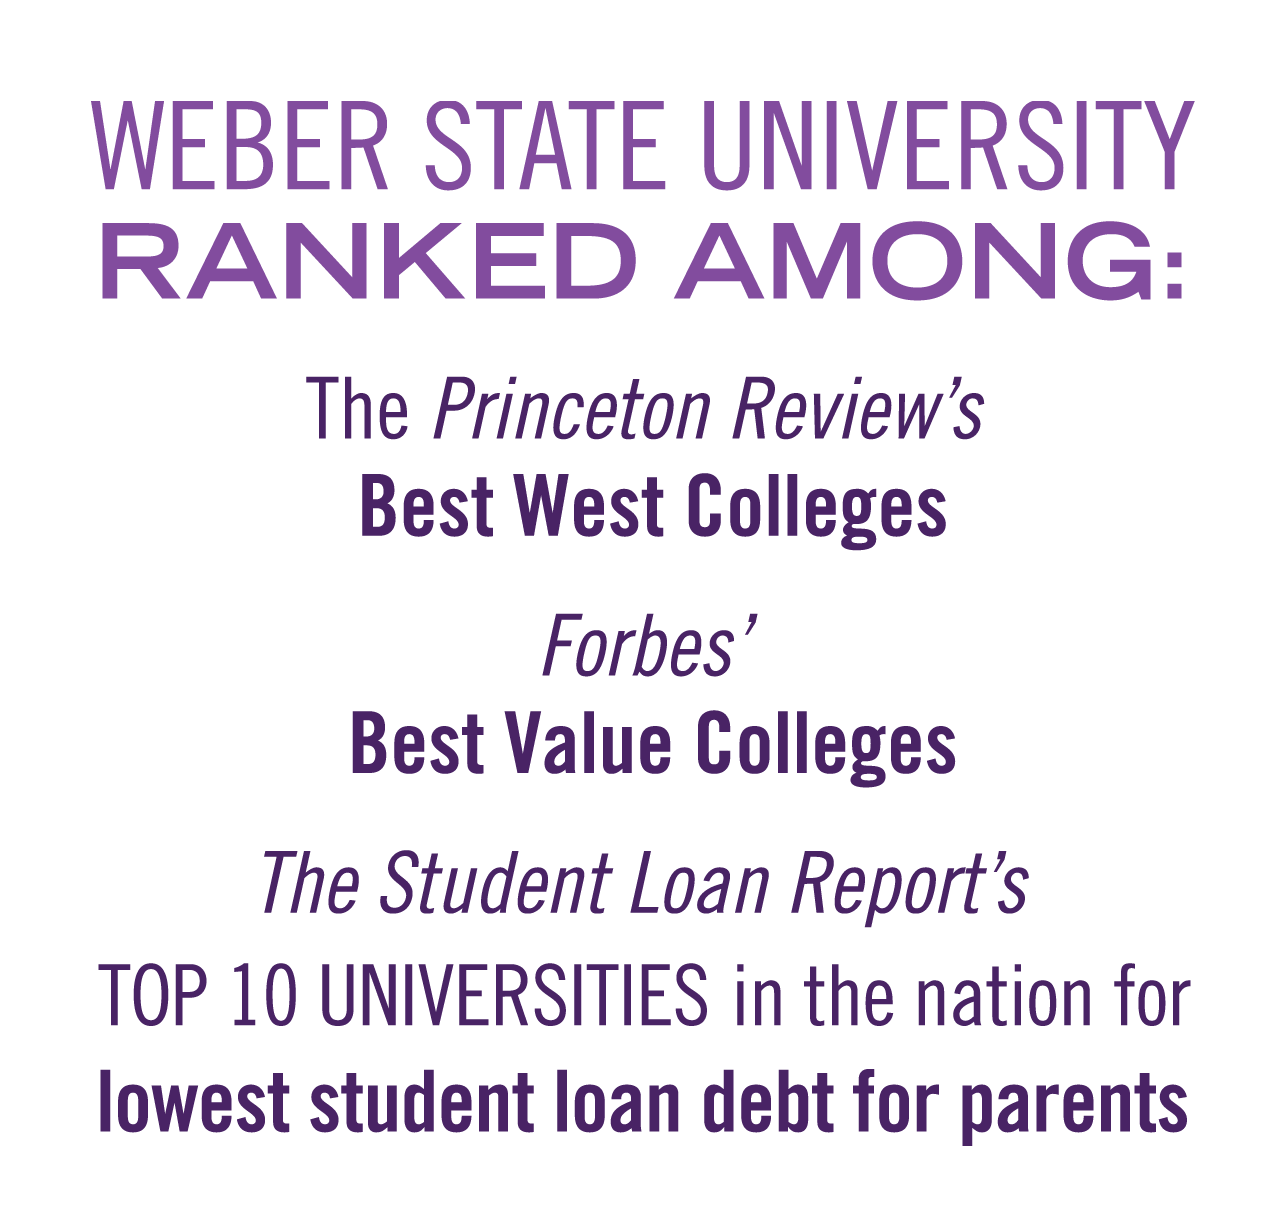 image text: weber state university ranked among the princeton review's best west colleges, forbes' best value colleges, the student loan report's top 10 universities in the nation for lowest student loan debt for parents